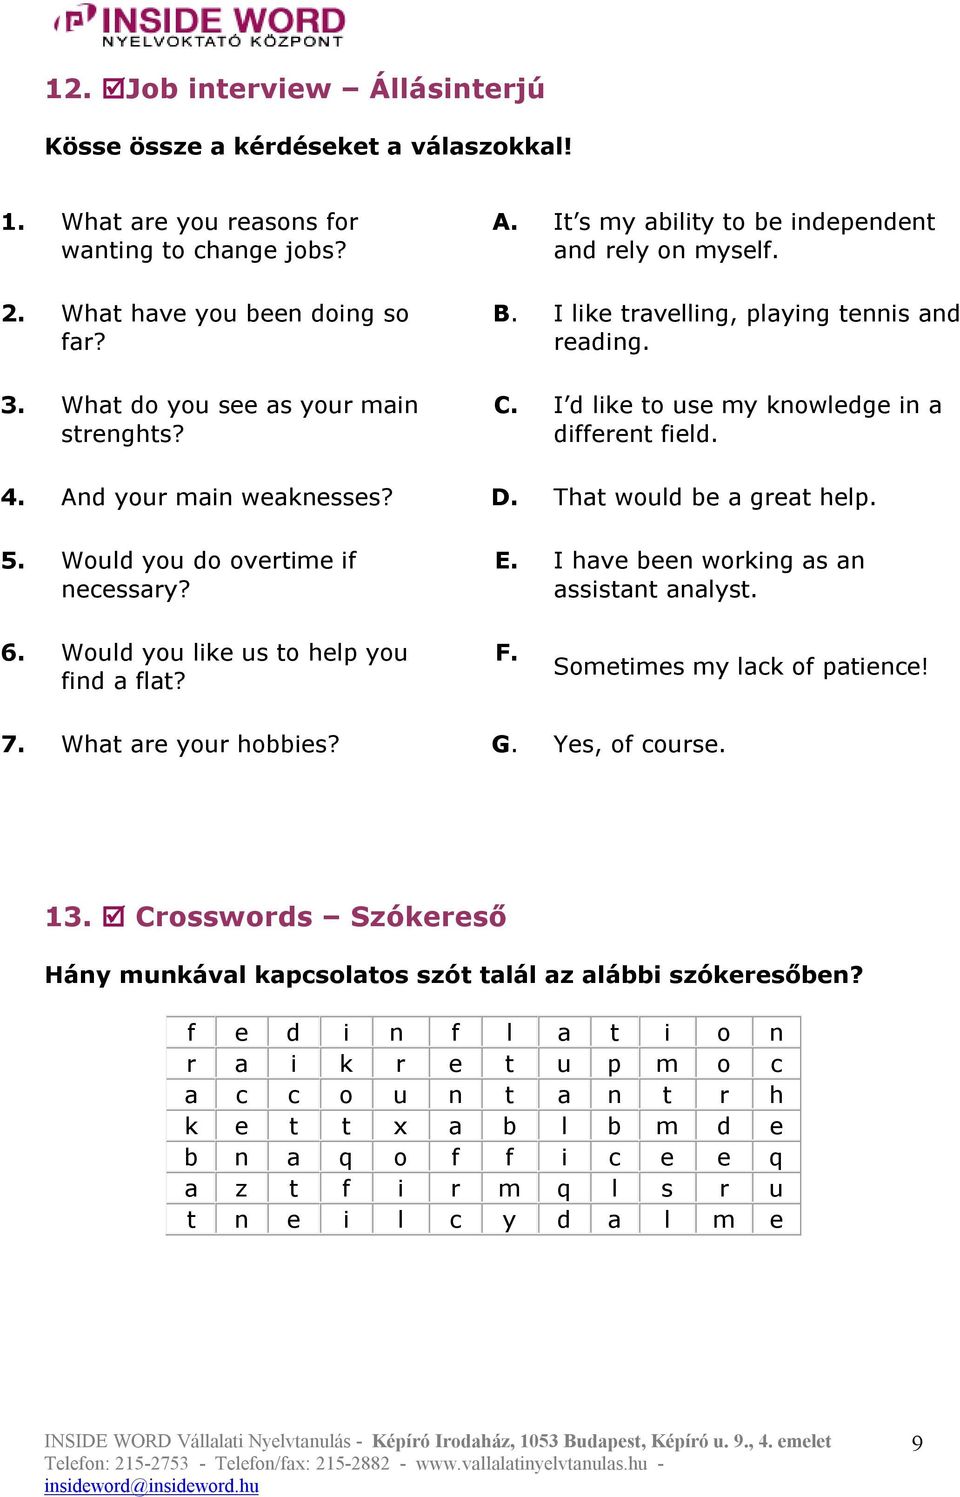 4. And your main weaknesses? D. That would be a great help. 5. Would you do overtime if necessary? E. I have been working as an assistant analyst. 6. Would you like us to help you find a flat? F.